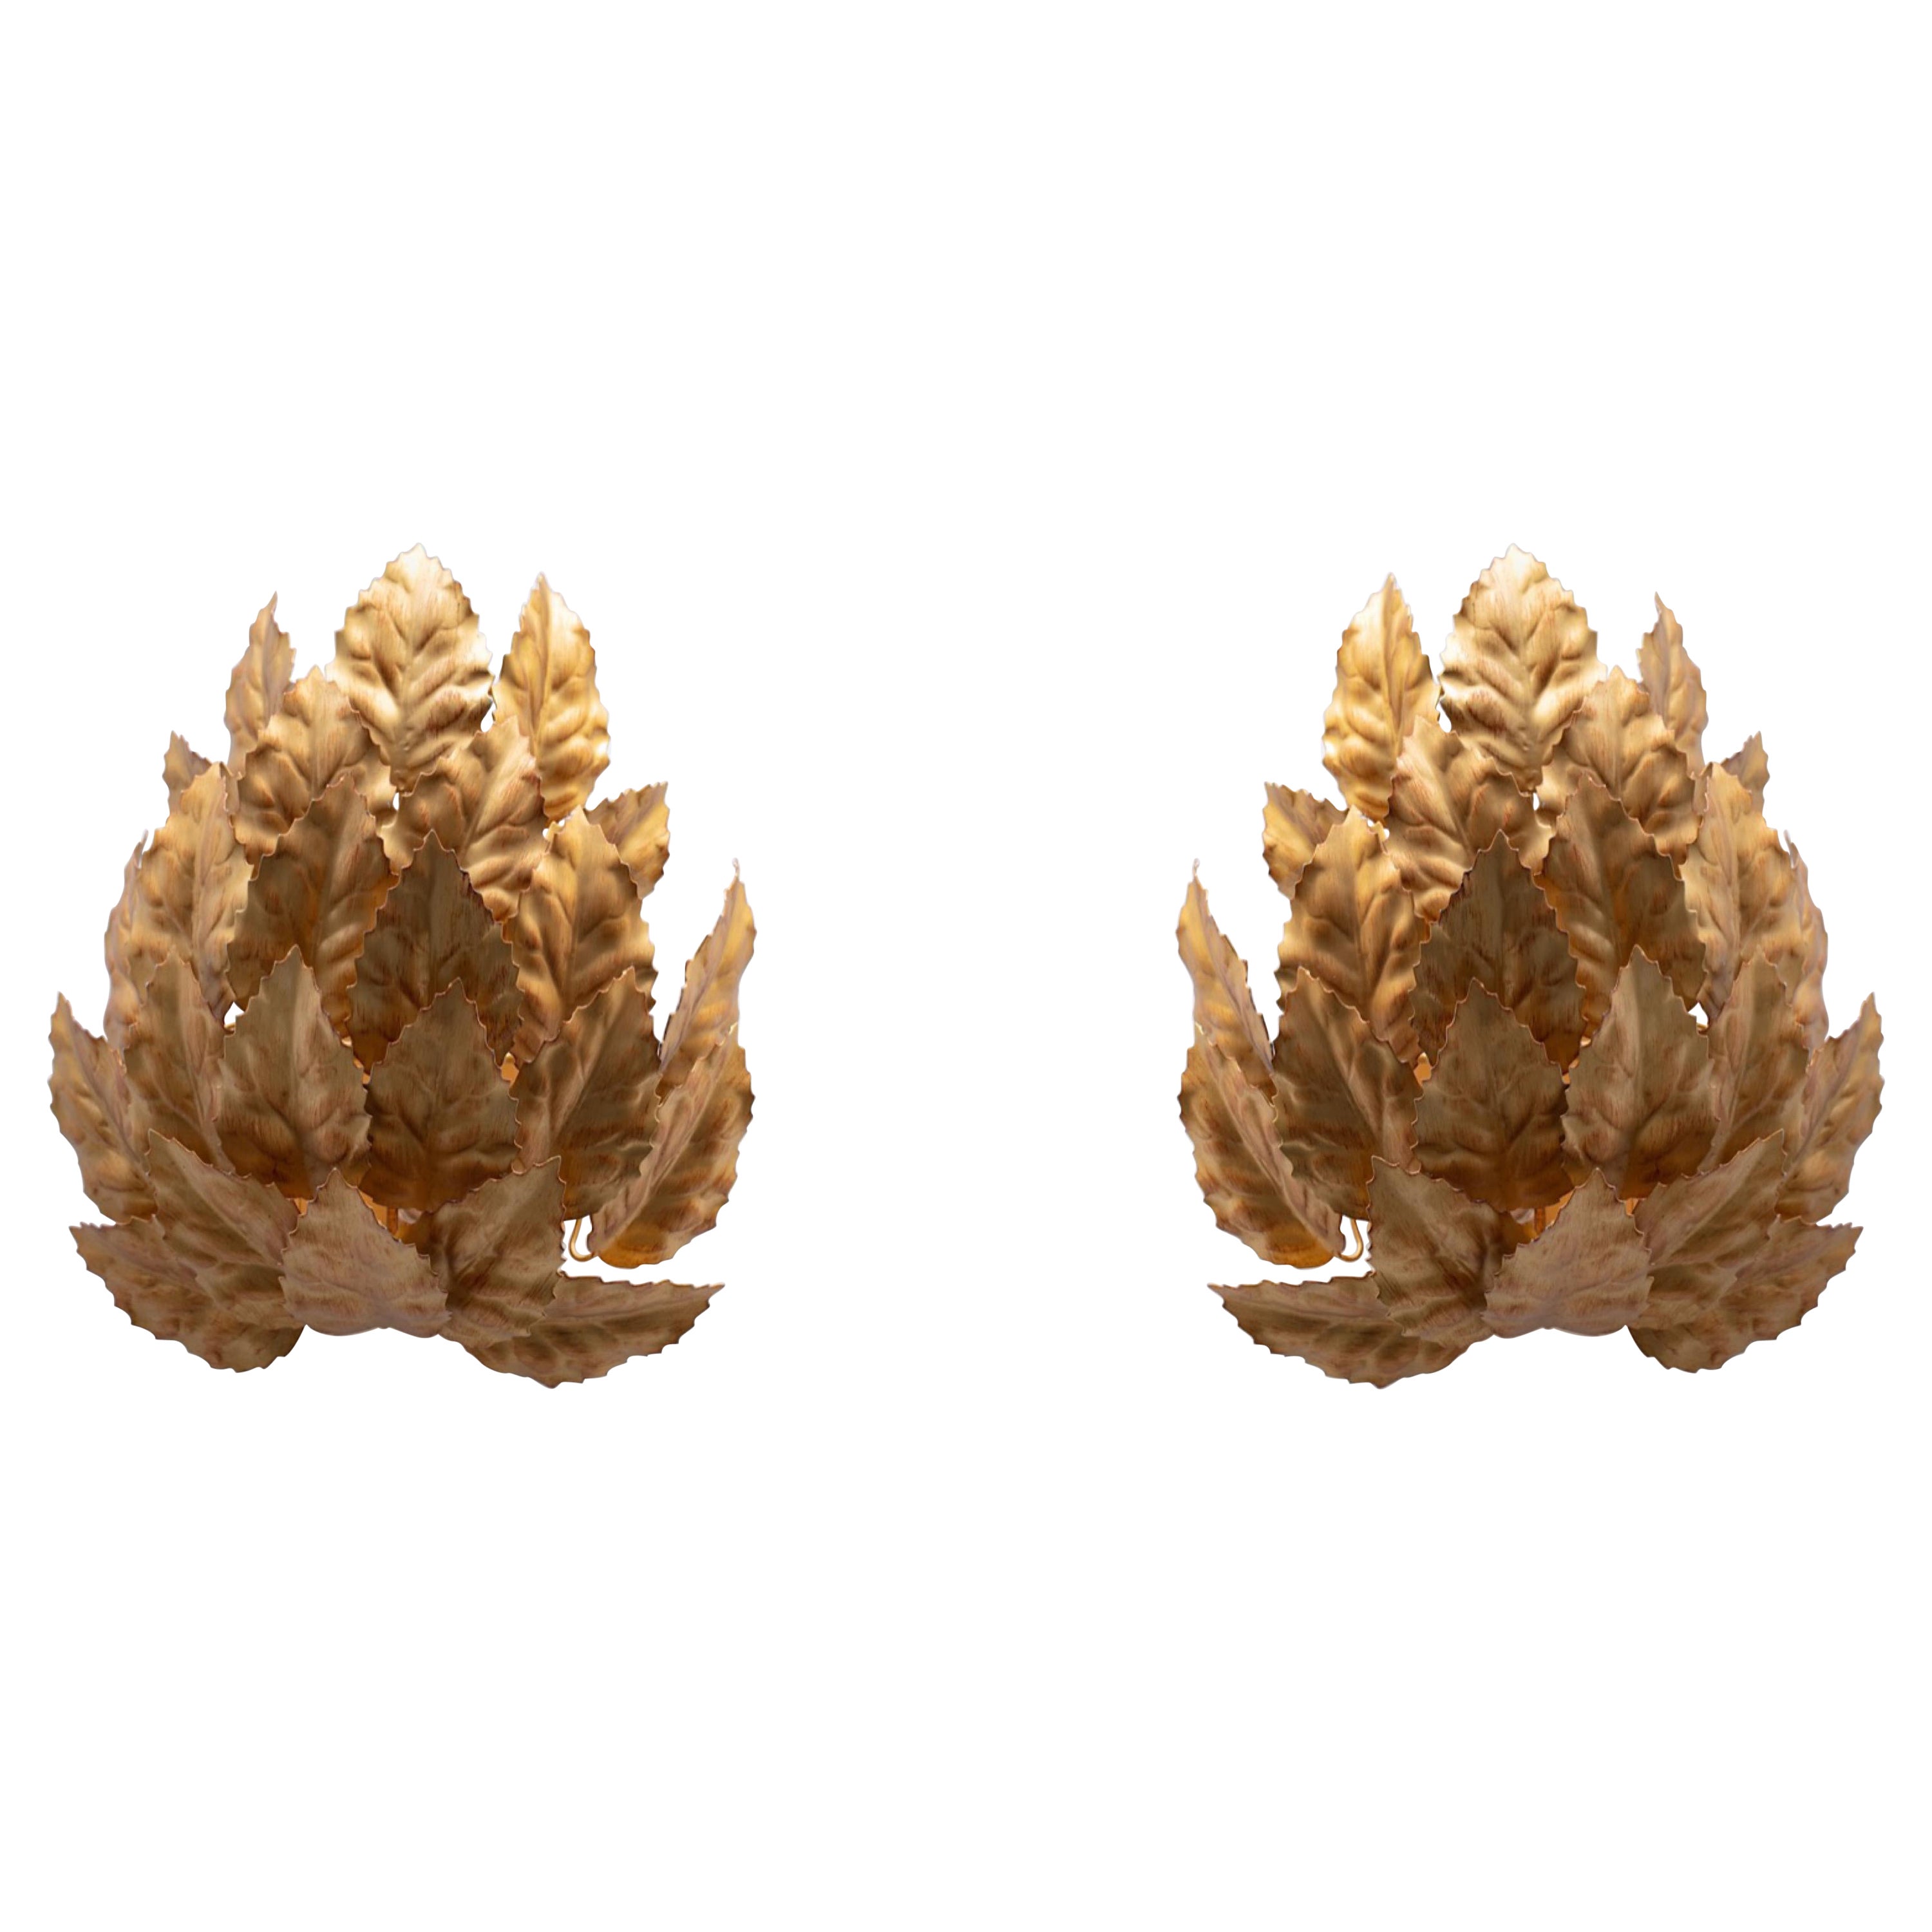 Pair of Hollywood Regency Gilt Holy Leaf Bouquet Themed Sconces, c. 1965 For Sale